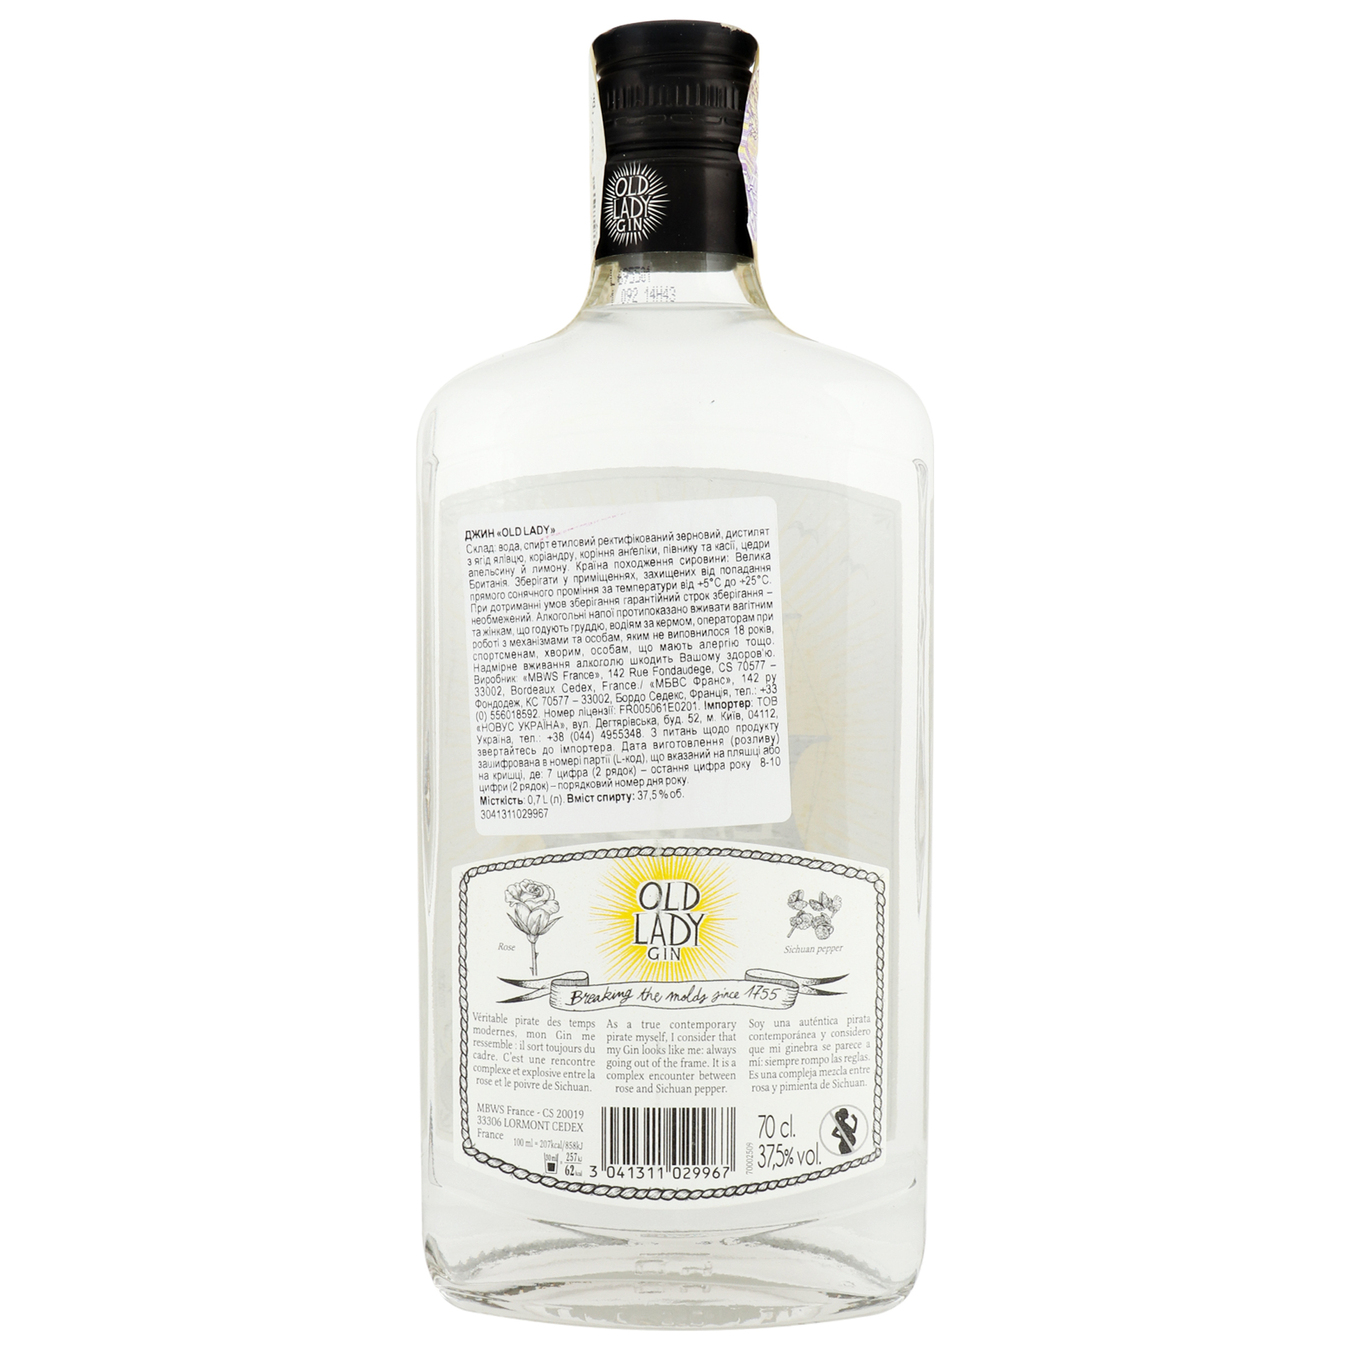 Old Lady London dry gin 37,5% 0,7l 2